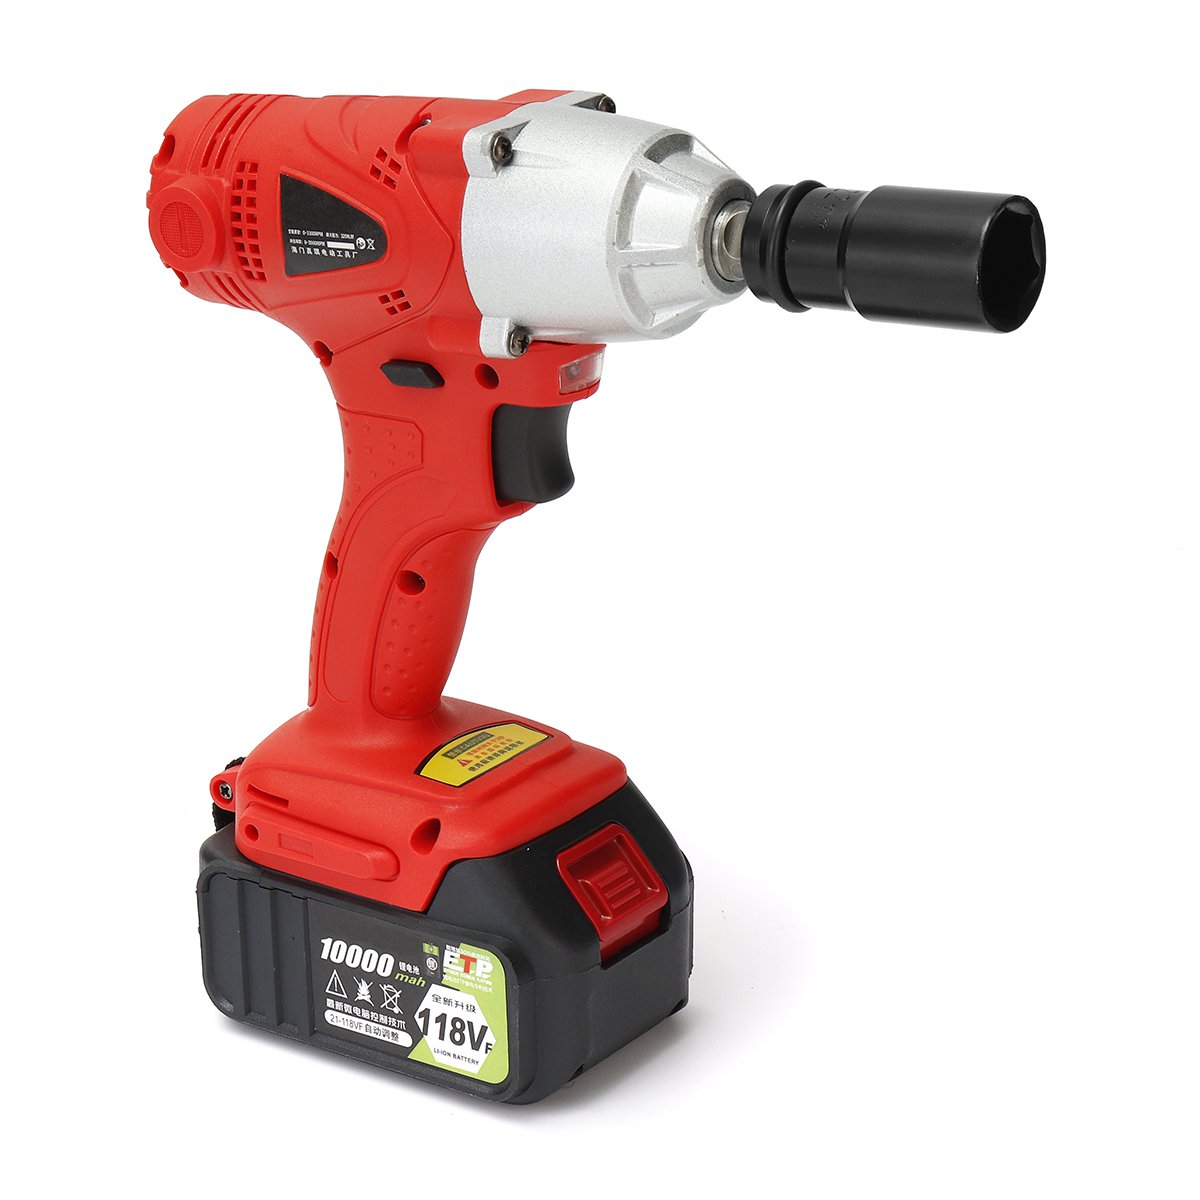 

1/2 Inch 21V 10000mAh Electric Impact Wrench Cordless 320N.M High Torque Tool with Battery